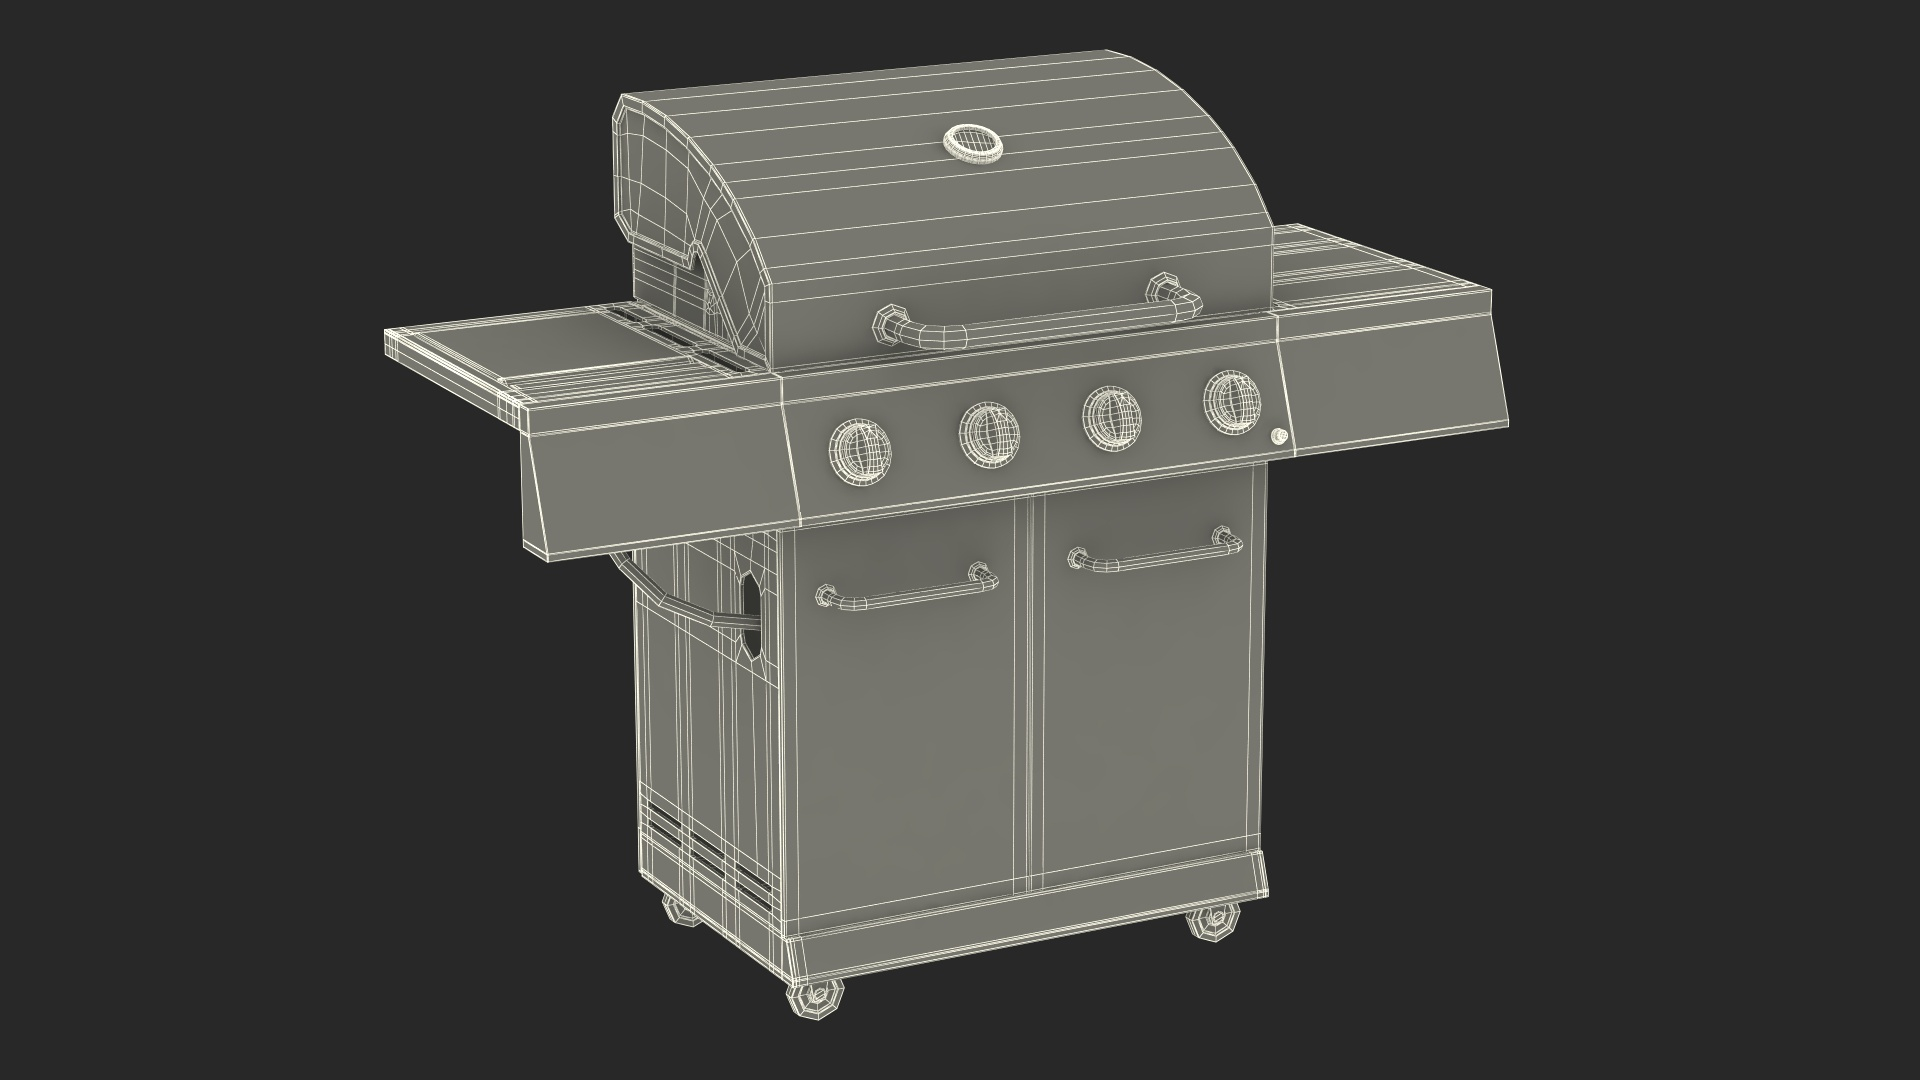 Stainless Steel Propane Gas Grill 3D model - TurboSquid 2157574